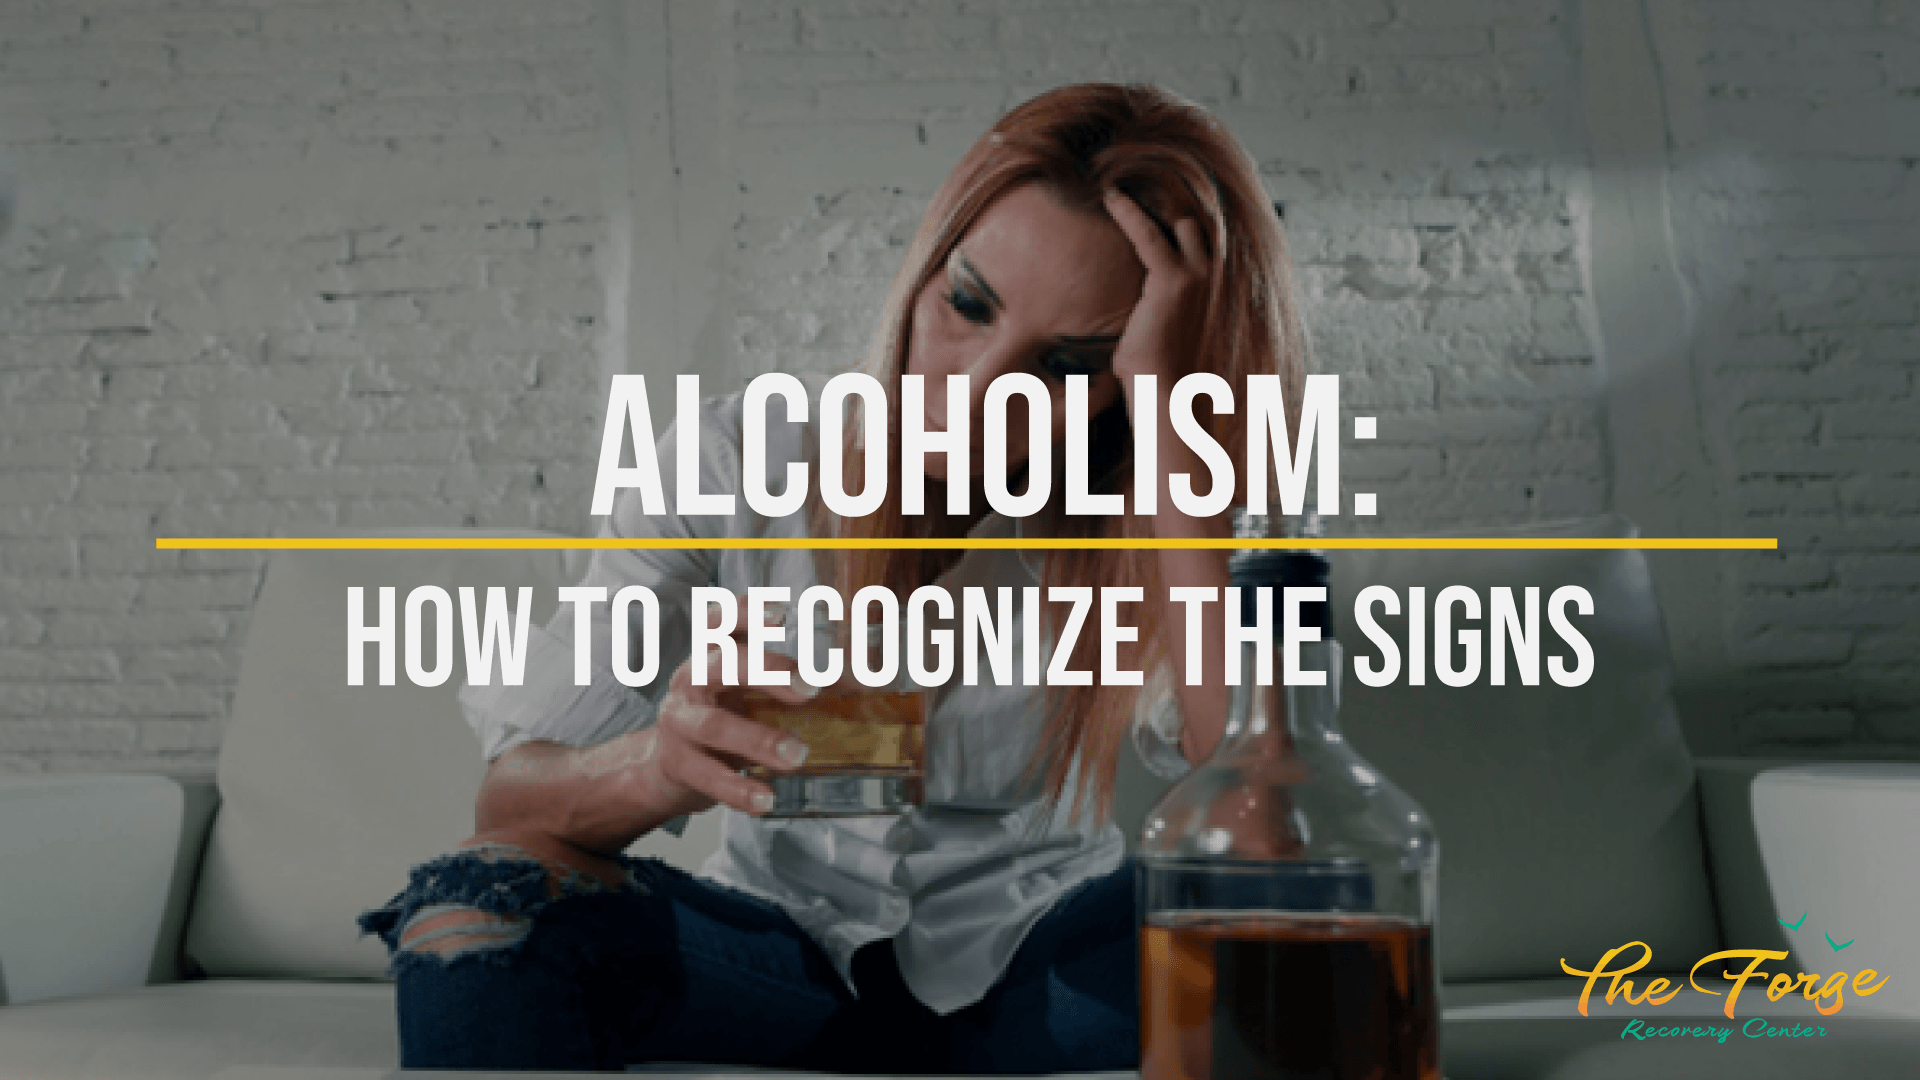 Alcoholism: What Are Some Major Telltale Signs of Alcoholism?